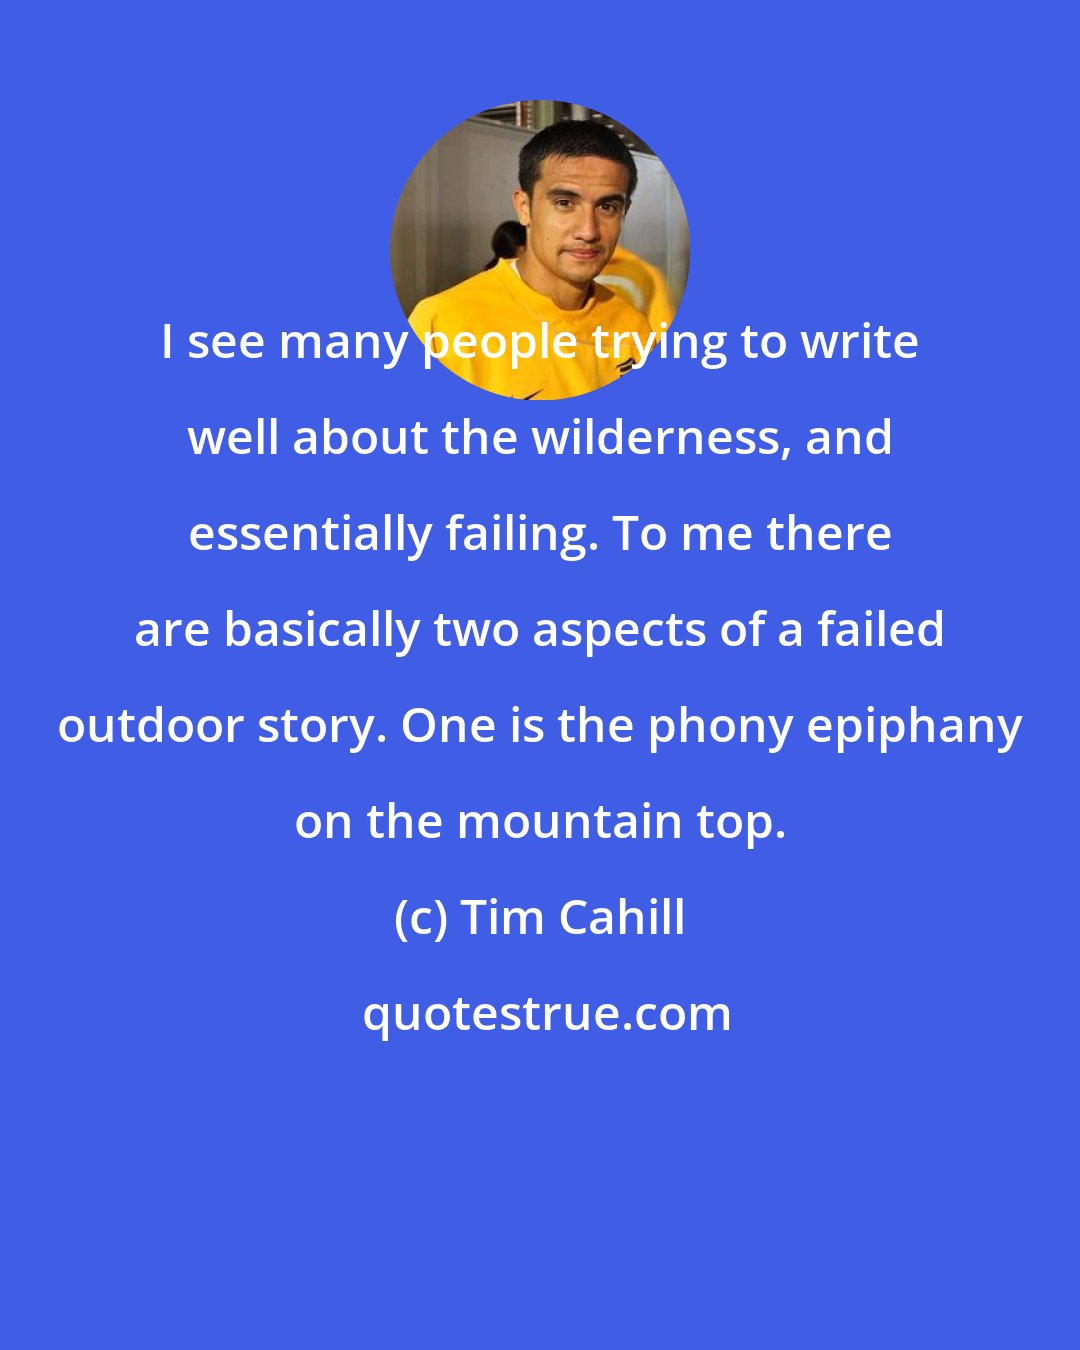 Tim Cahill: I see many people trying to write well about the wilderness, and essentially failing. To me there are basically two aspects of a failed outdoor story. One is the phony epiphany on the mountain top.